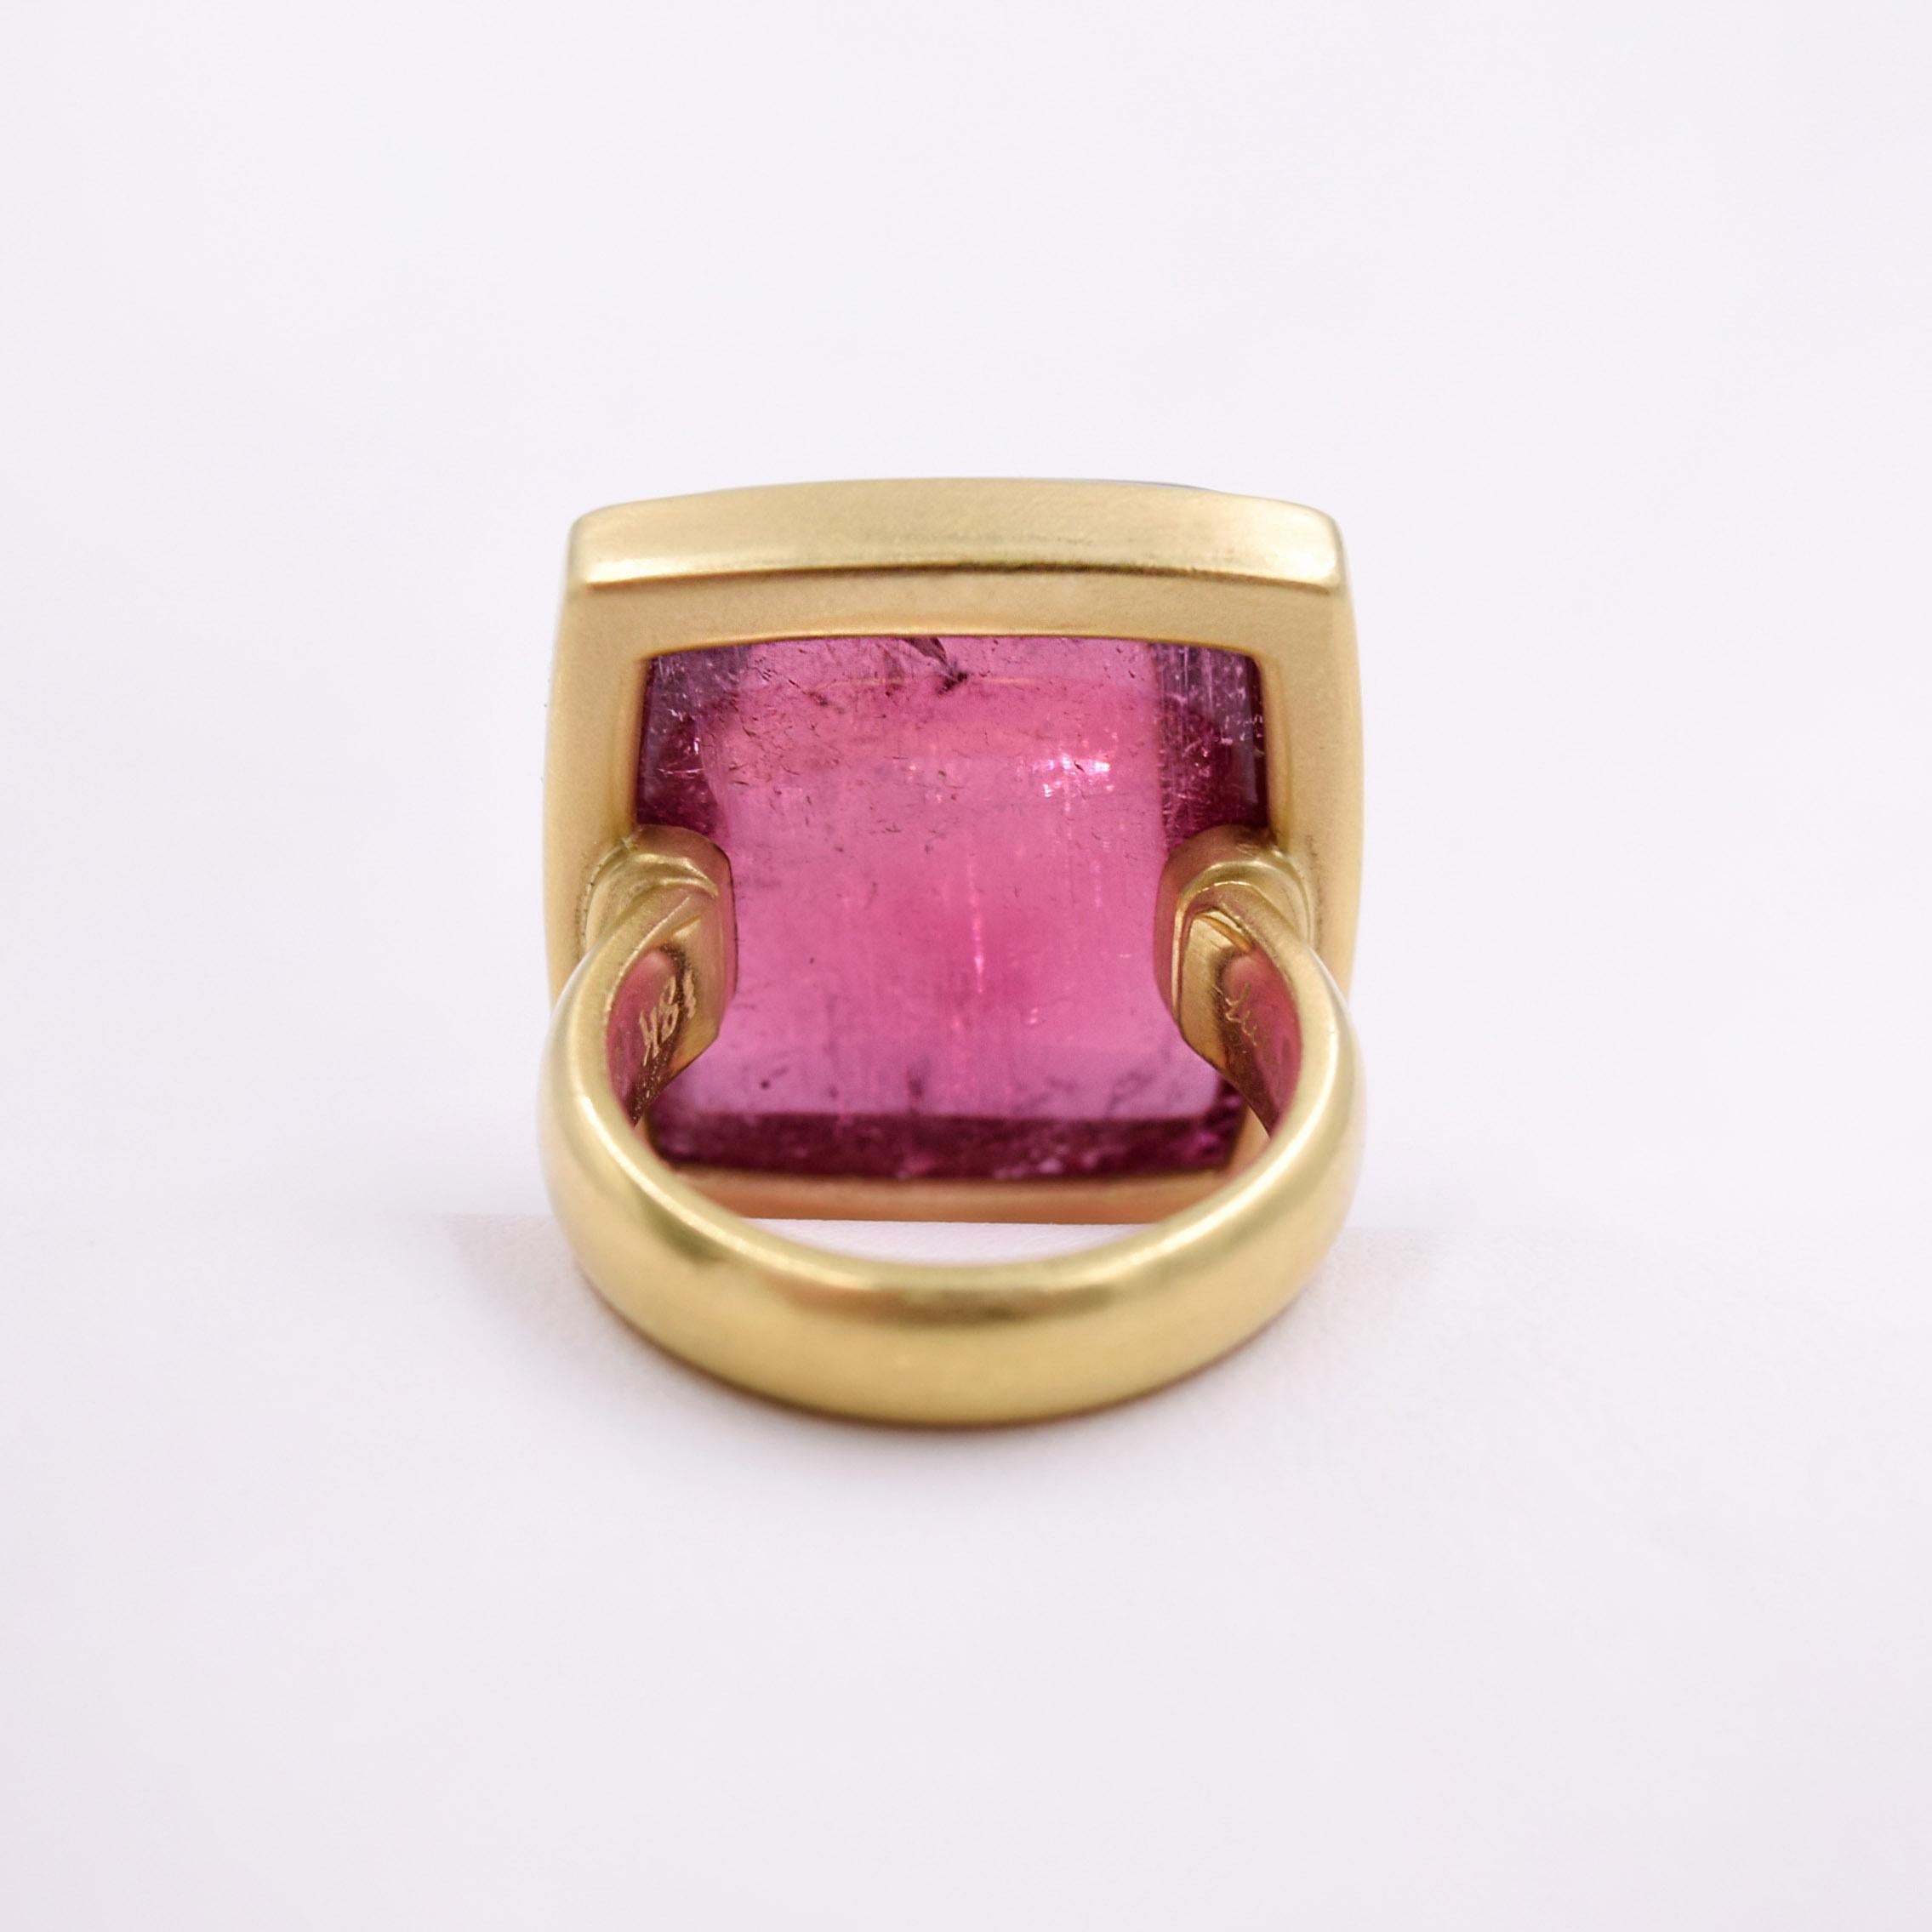 Cushion Cut Lucas Priolo 54.87 Carat Cabochon Pink Tourmaline Gold Cocktail Ring For Sale